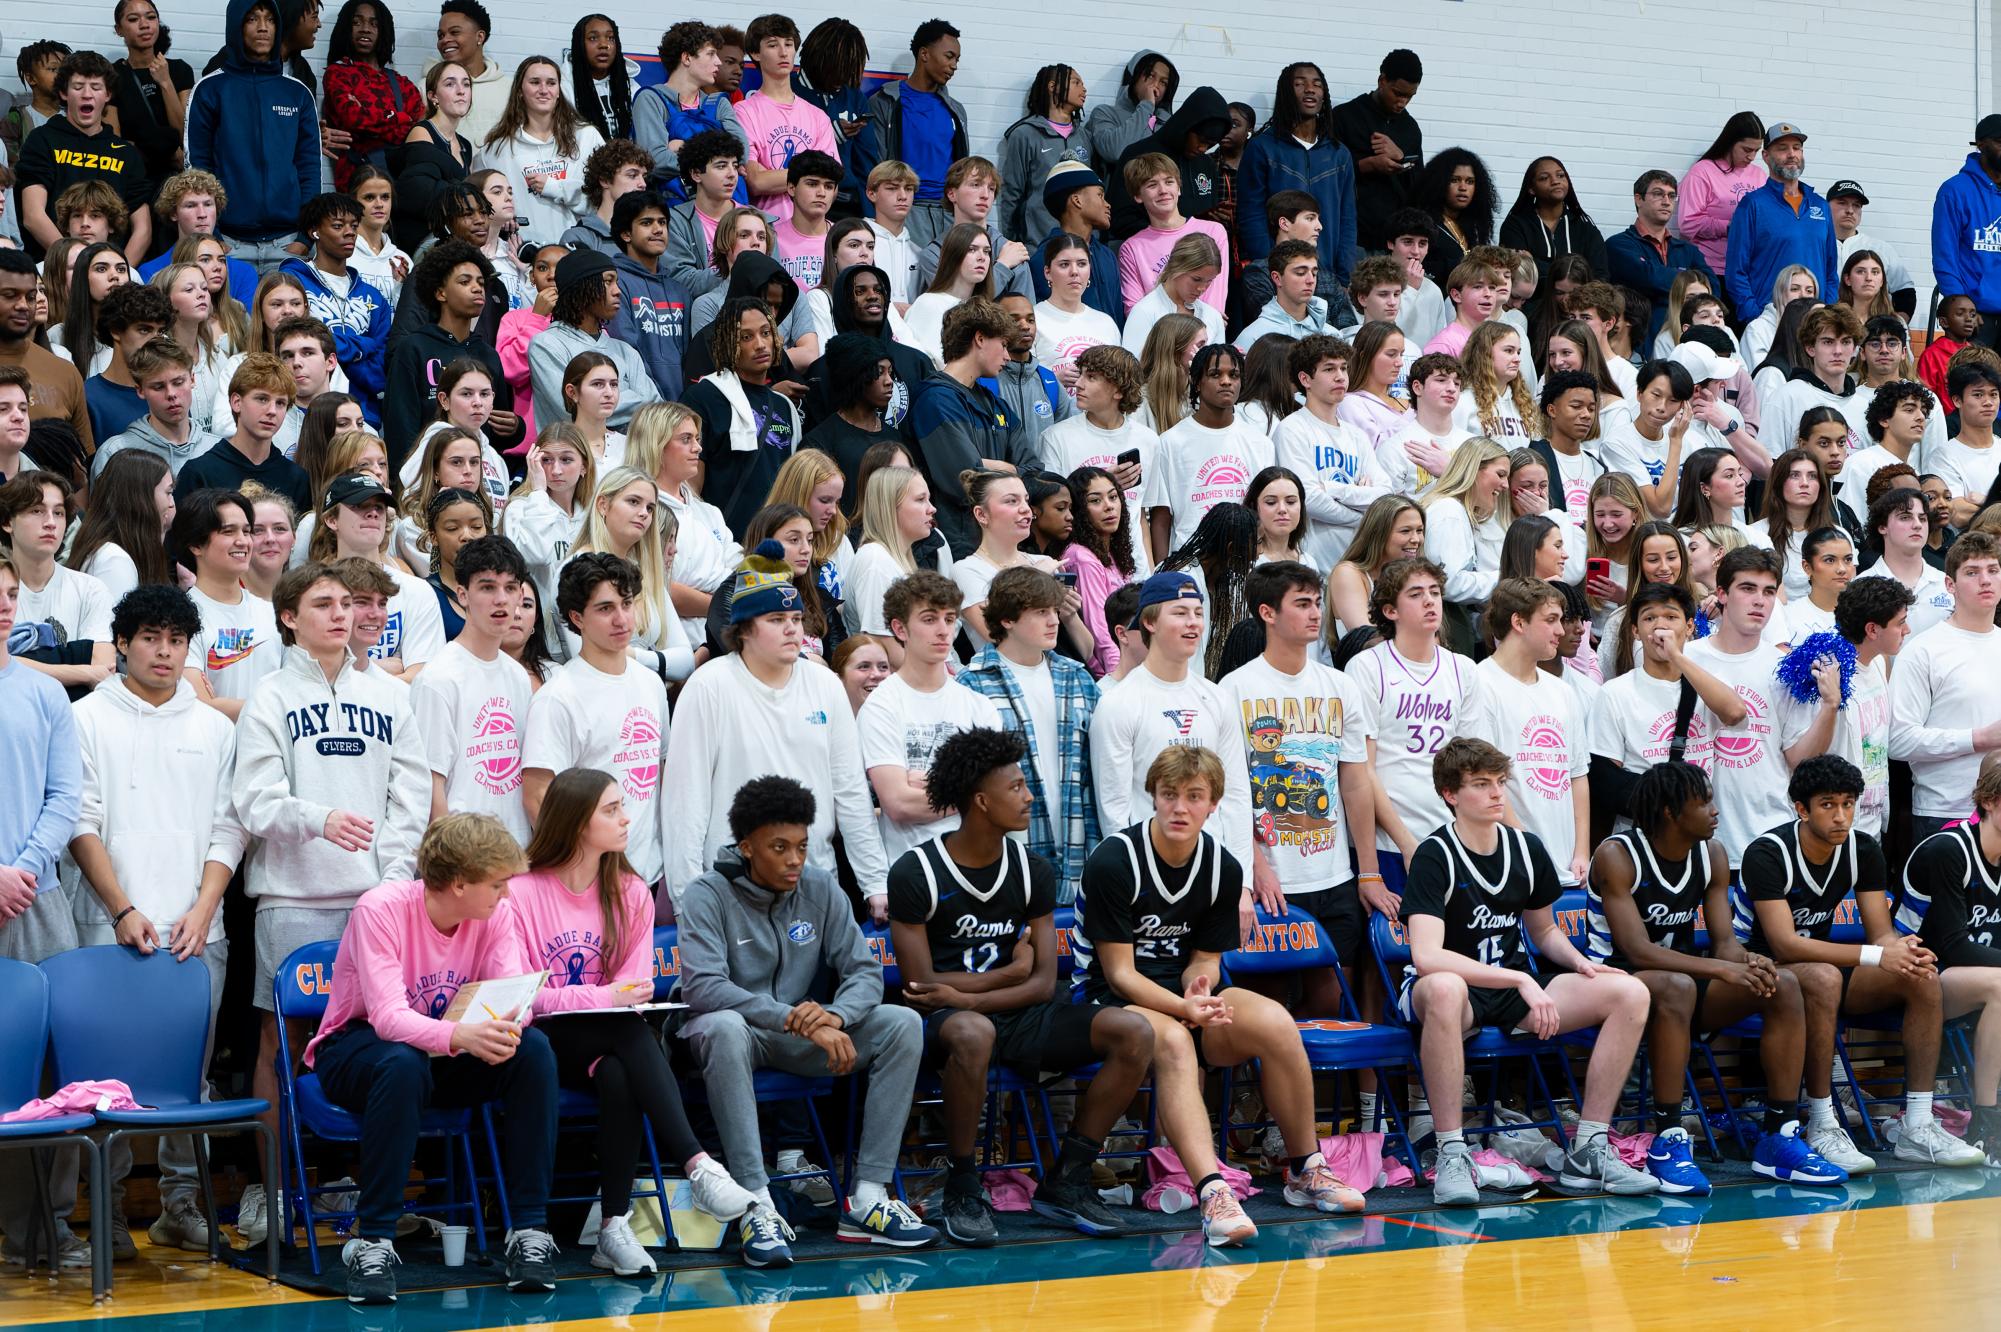 Ladue students attend the Ladue vs. Clayton Coaches vs. Cancer Basketball game at Clayton High School Dec 8. Ladue won the game with a score of 79-55. “I feel like sports bring our school together and it’s really cool to see my friends out there, playing and representing the school,” Johnathan Vidal-Alvarado (11) said.